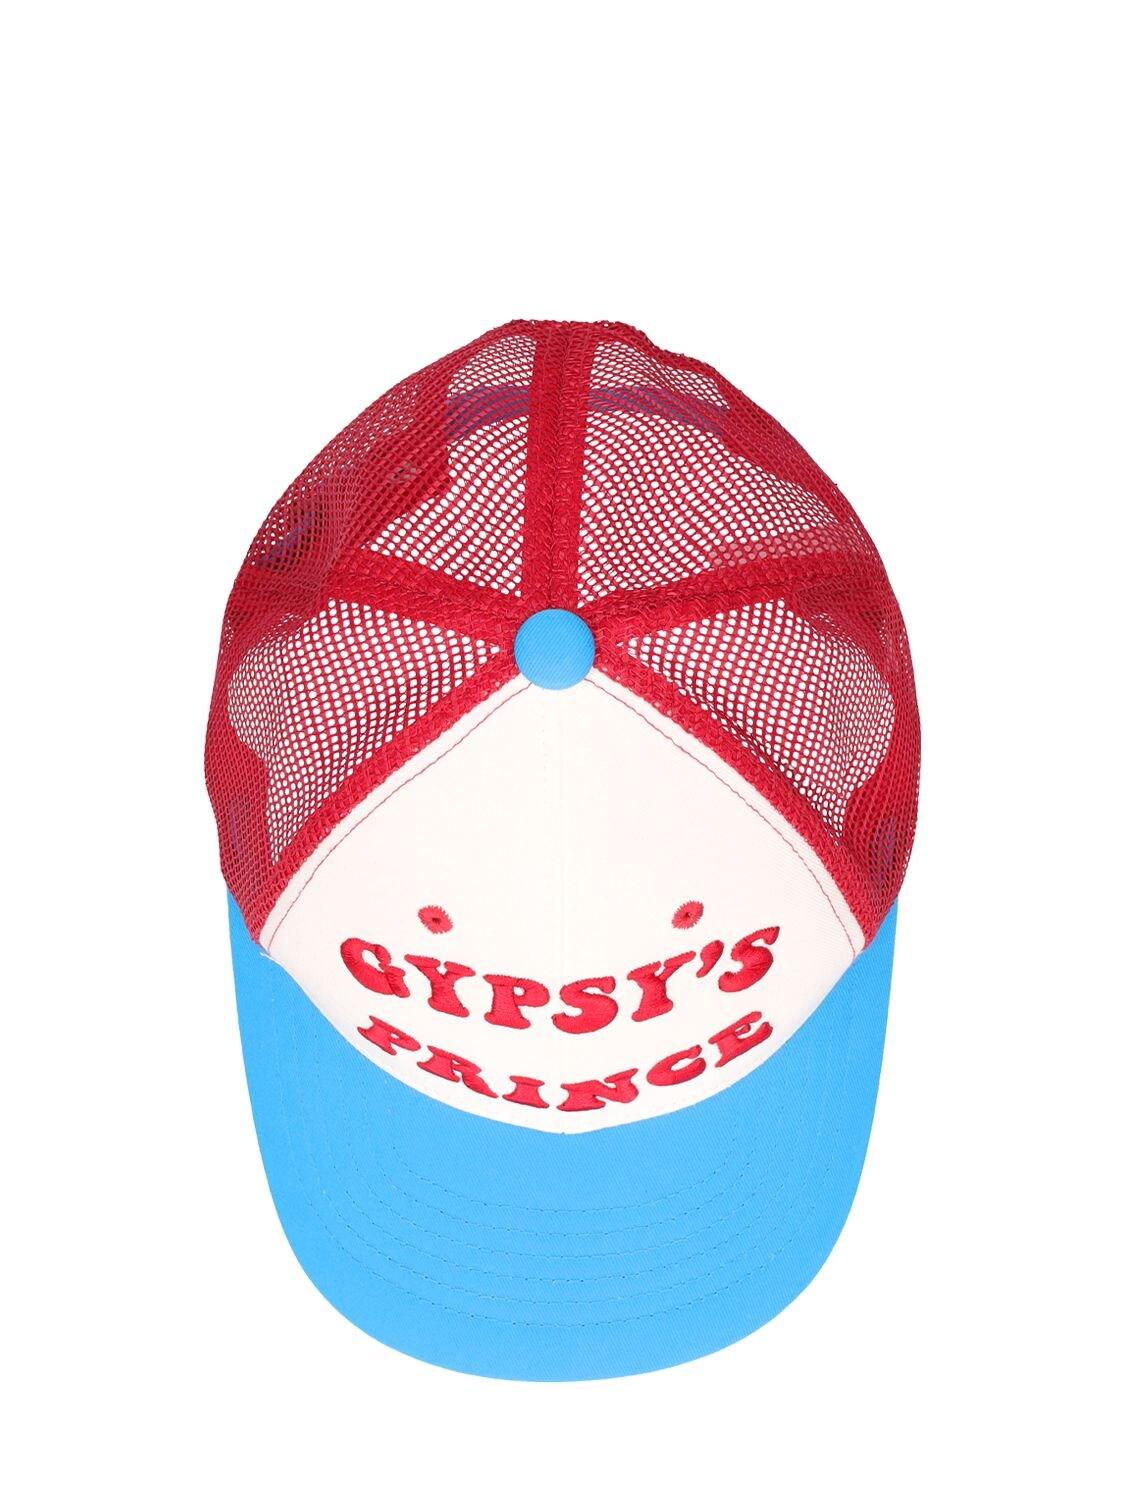 ANDERSSON BELL Gypsy's Prince Embroidery Cotton Cap in Red/White 